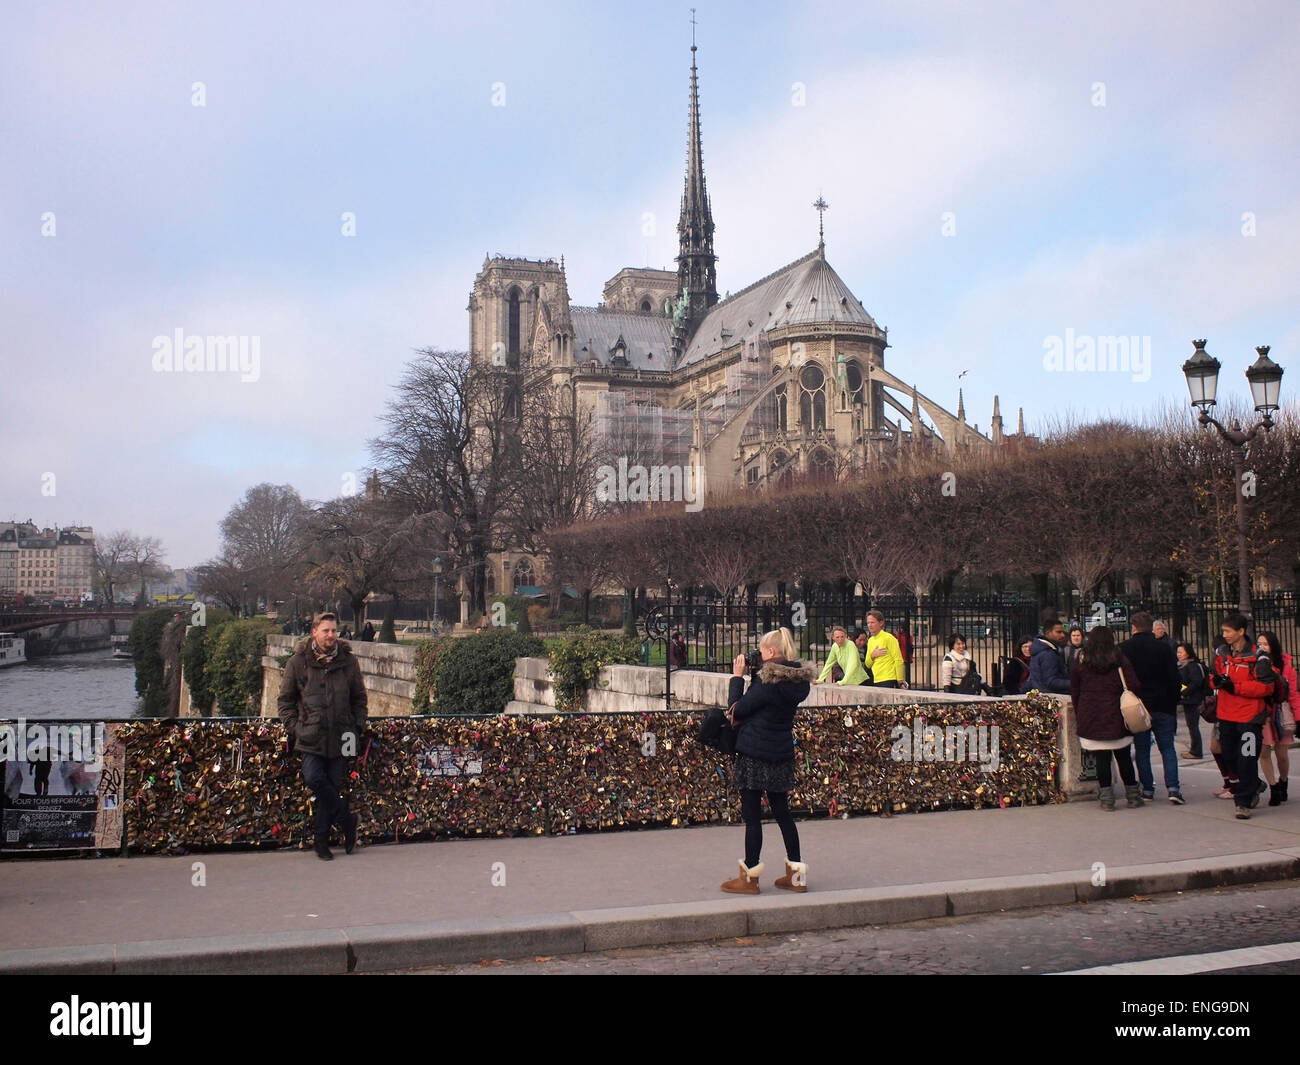 Tourists at the famous padlock bridge in Paris with Notre Dame cathedral in the background Stock Photo